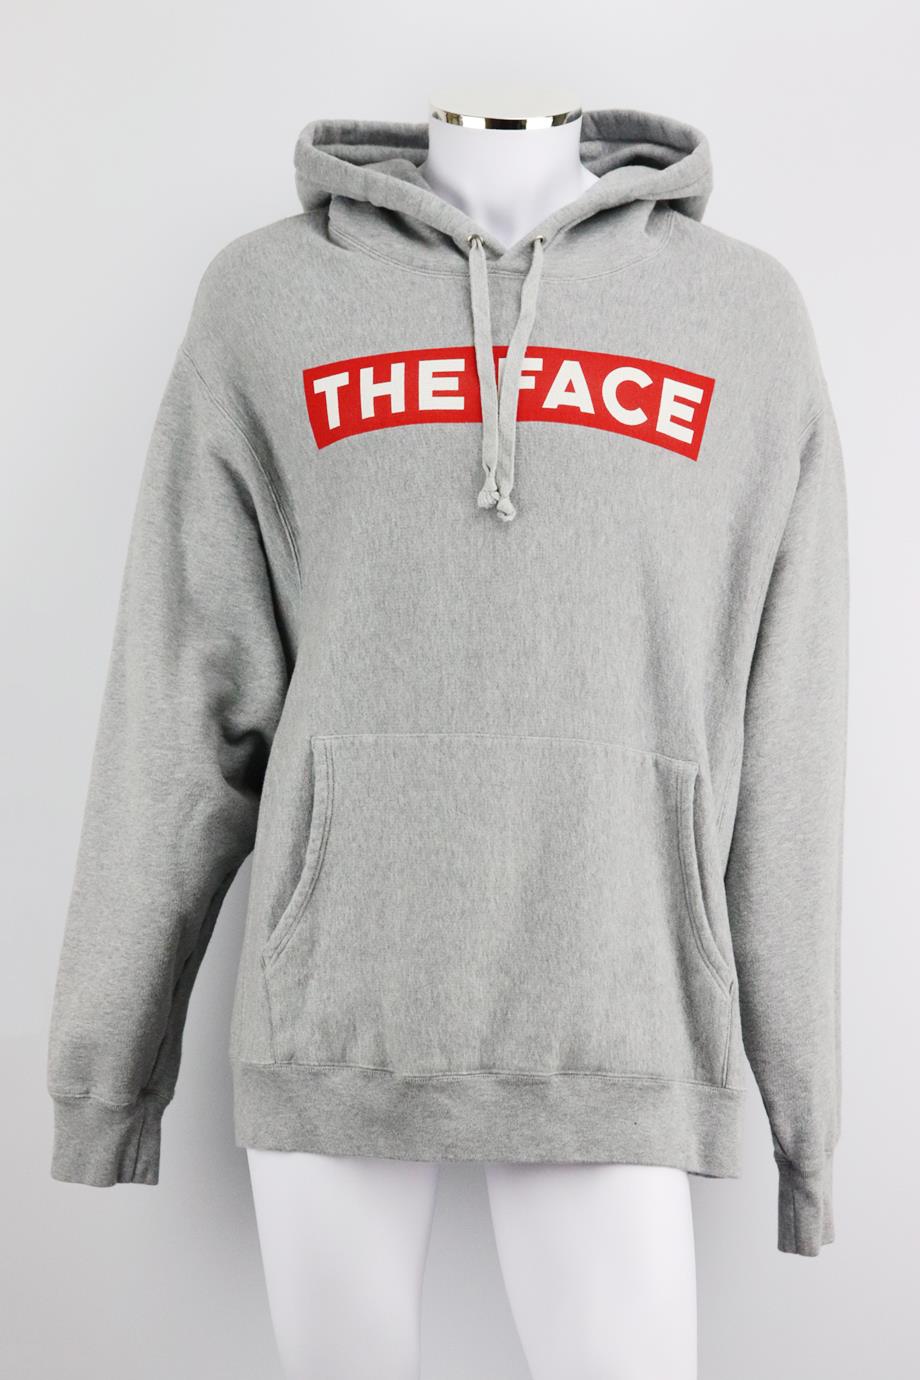 GUCCI + THE FACE MEN'S OVERSIZED PRINTED COTTON TERRY HOODIE XLARGE